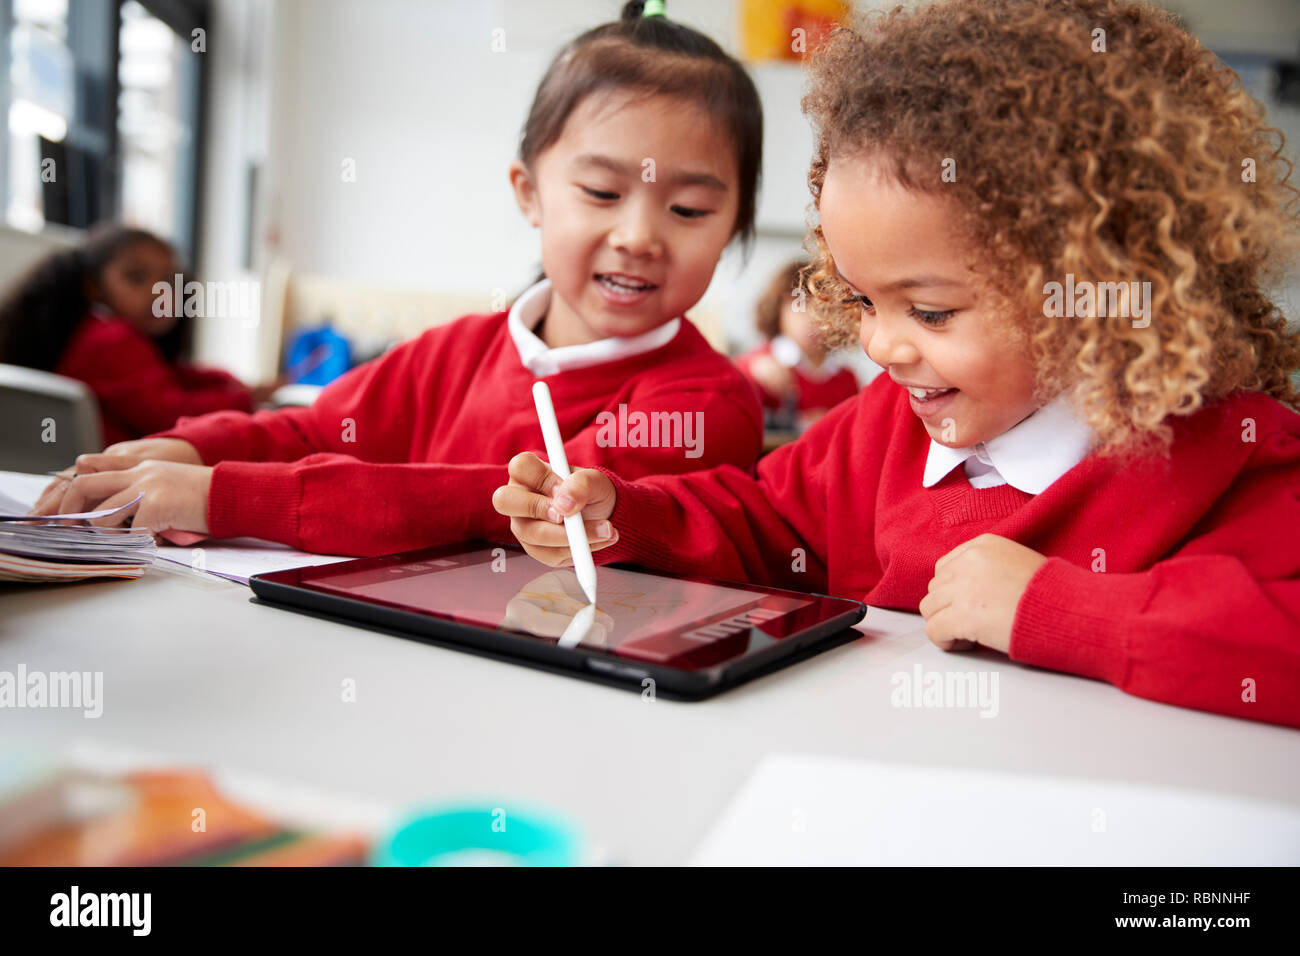 Close up of two kindergarten schoolgirls wearing school uniforms, sitting at a desk in a classroom using a tablet computer and stylus, looking at screen and smiling Stock Photo